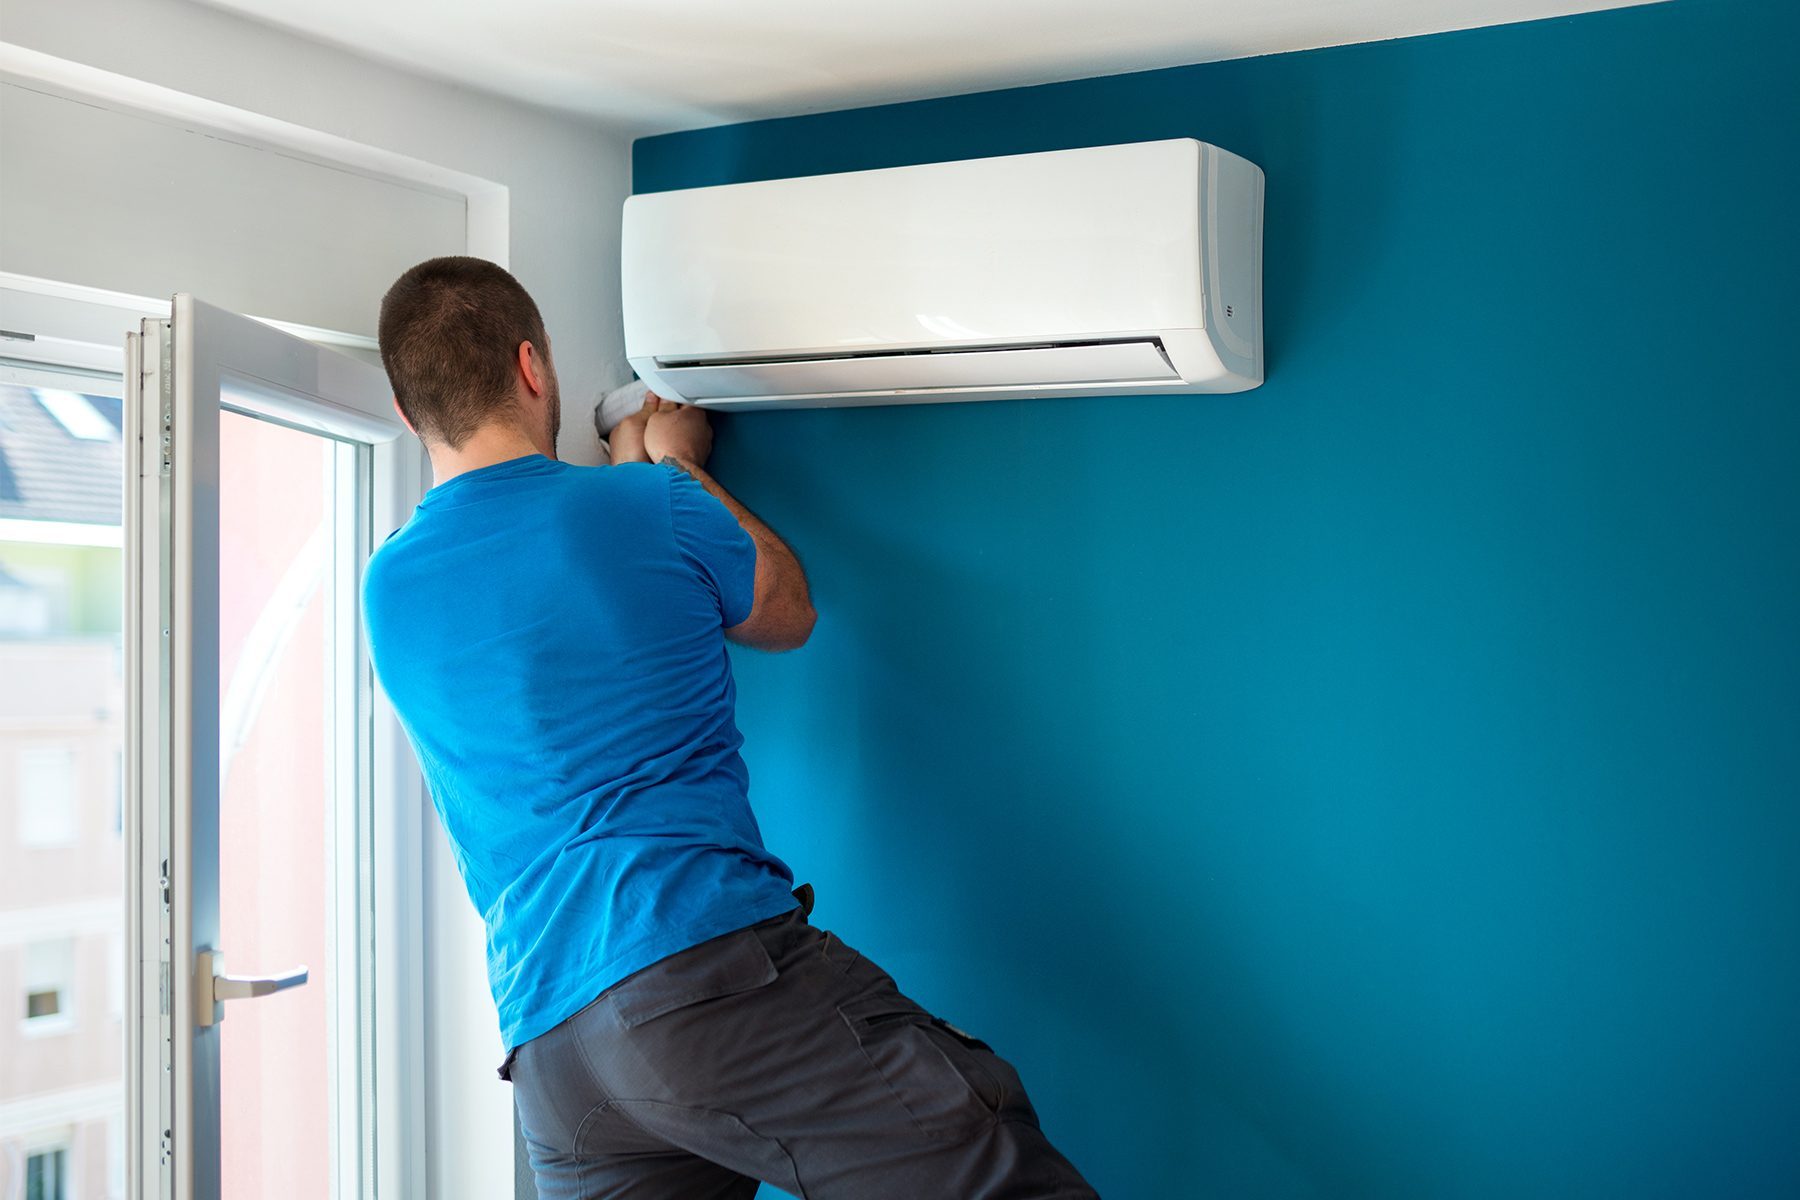 Practical Advice for Installing an Air Conditioner